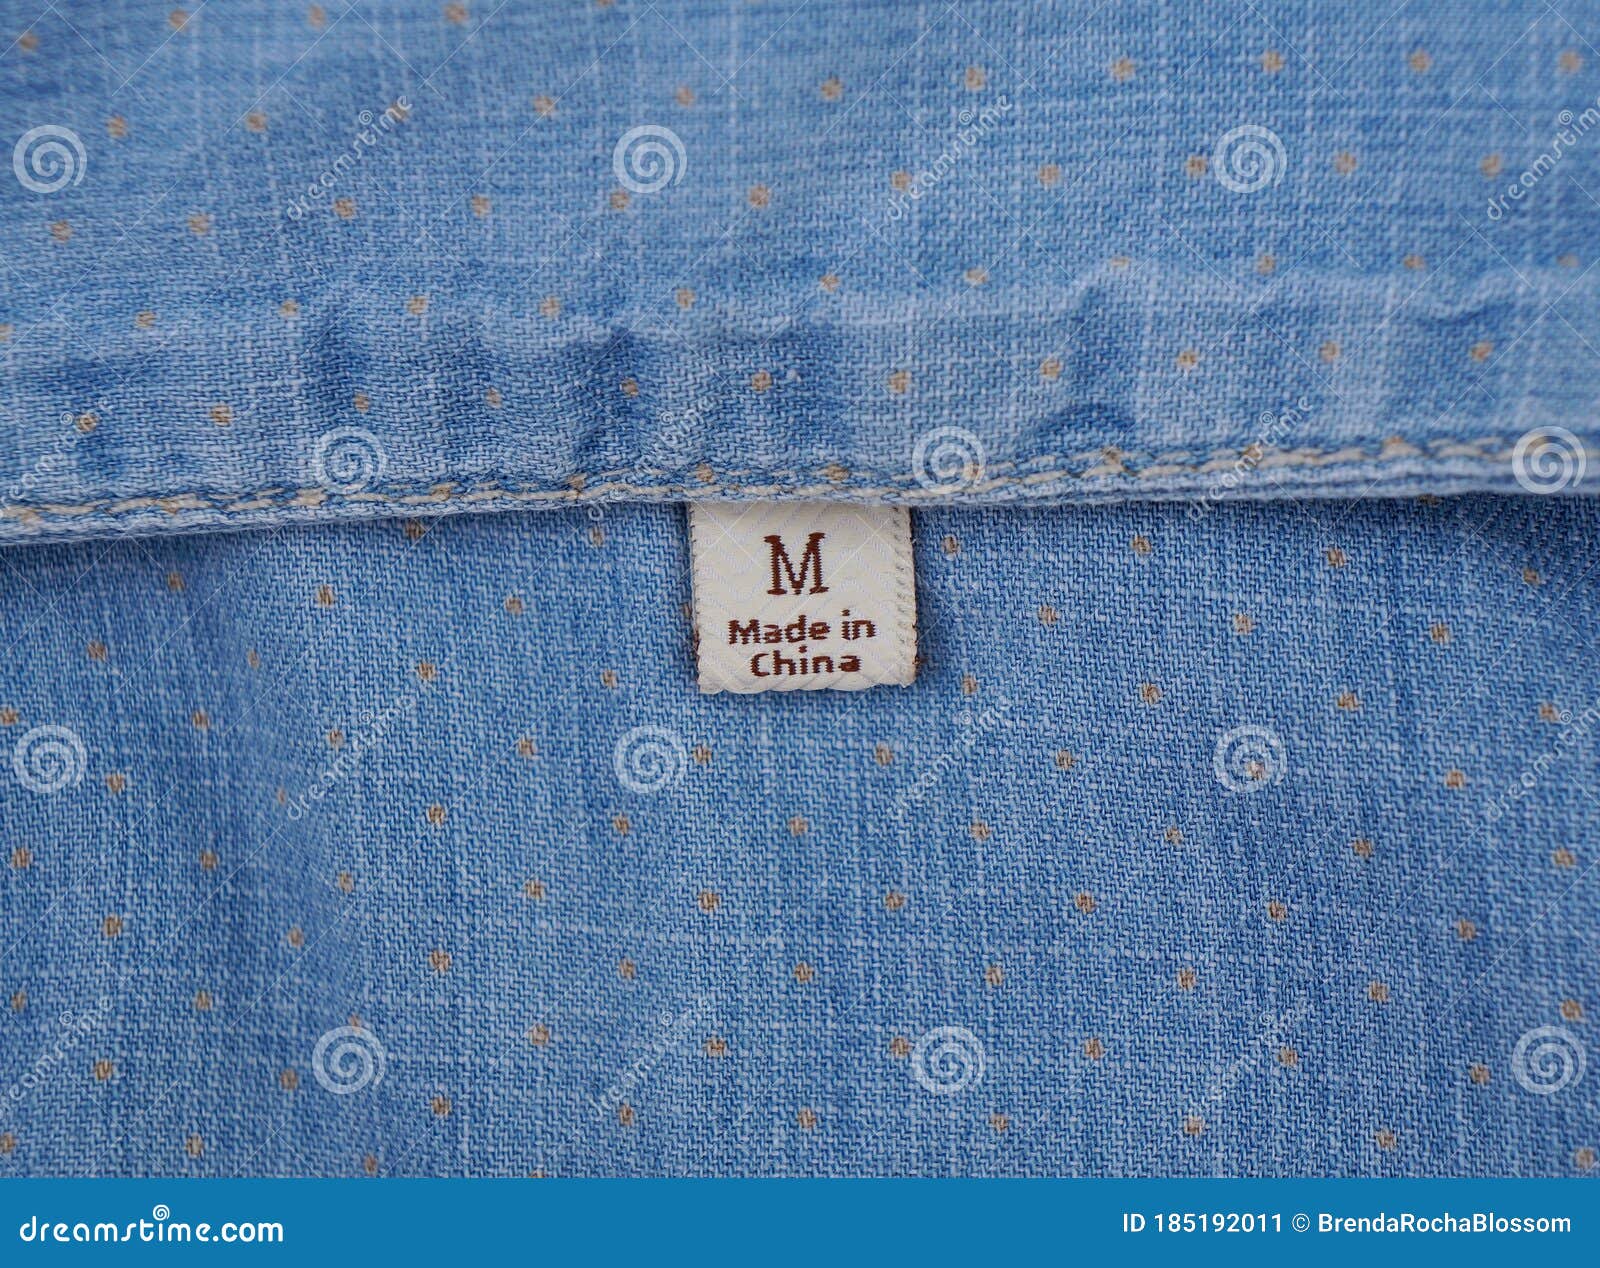 Clothing Label Made in China. China Product Stock Image - Image of cloth,  fabric: 185192011